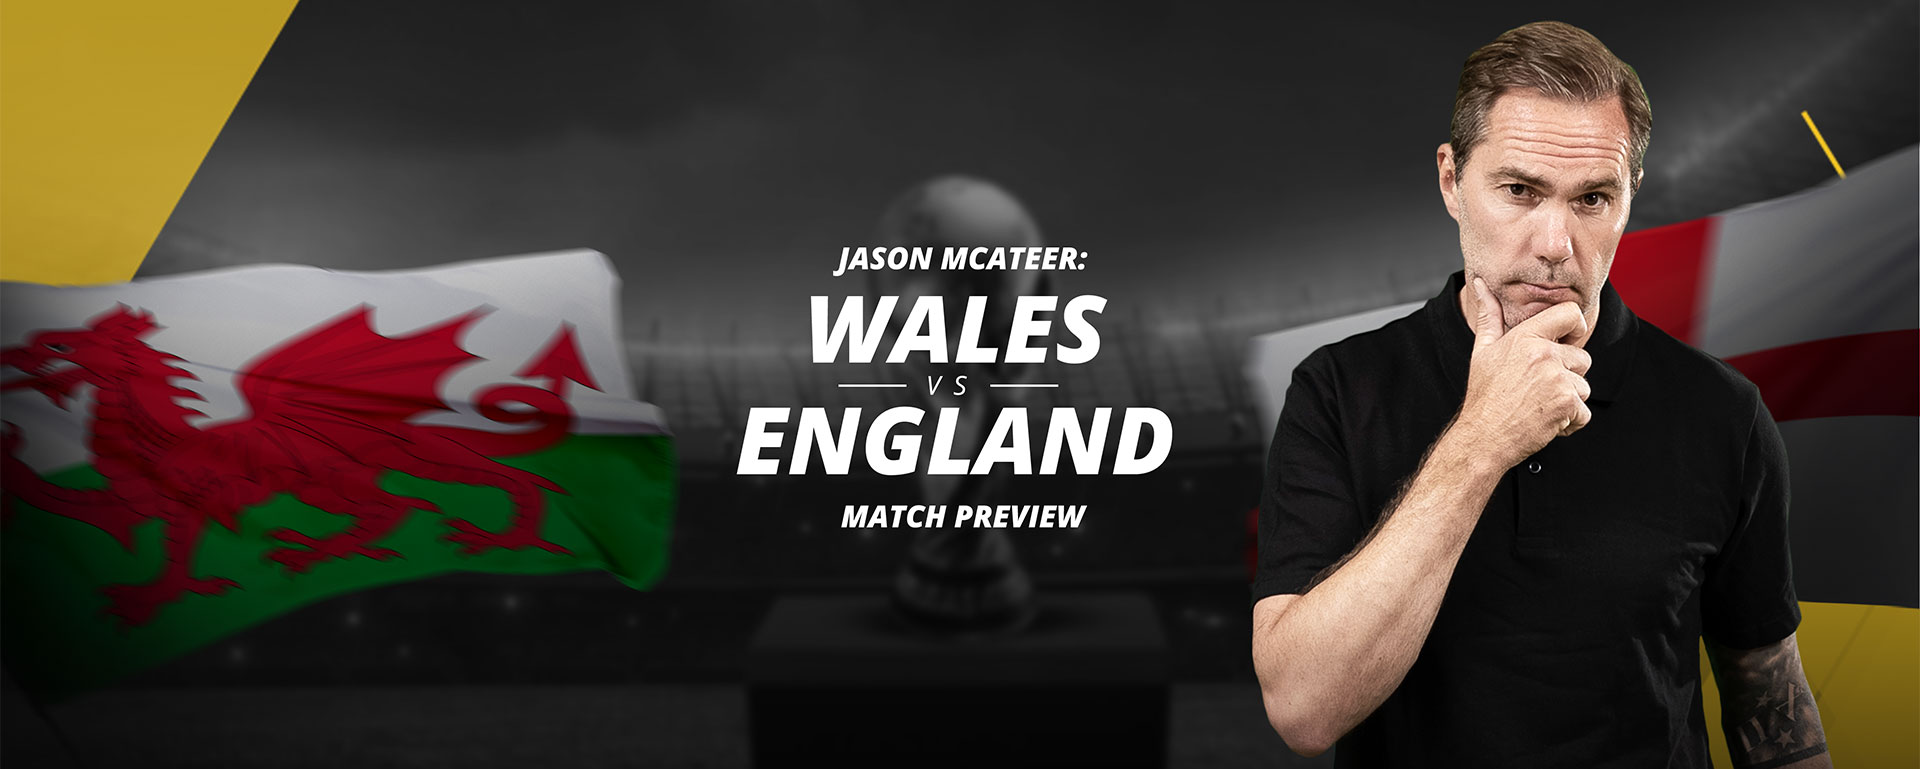 JASON MCATEER: WALES VS ENGLAND MATCH PREVIEW